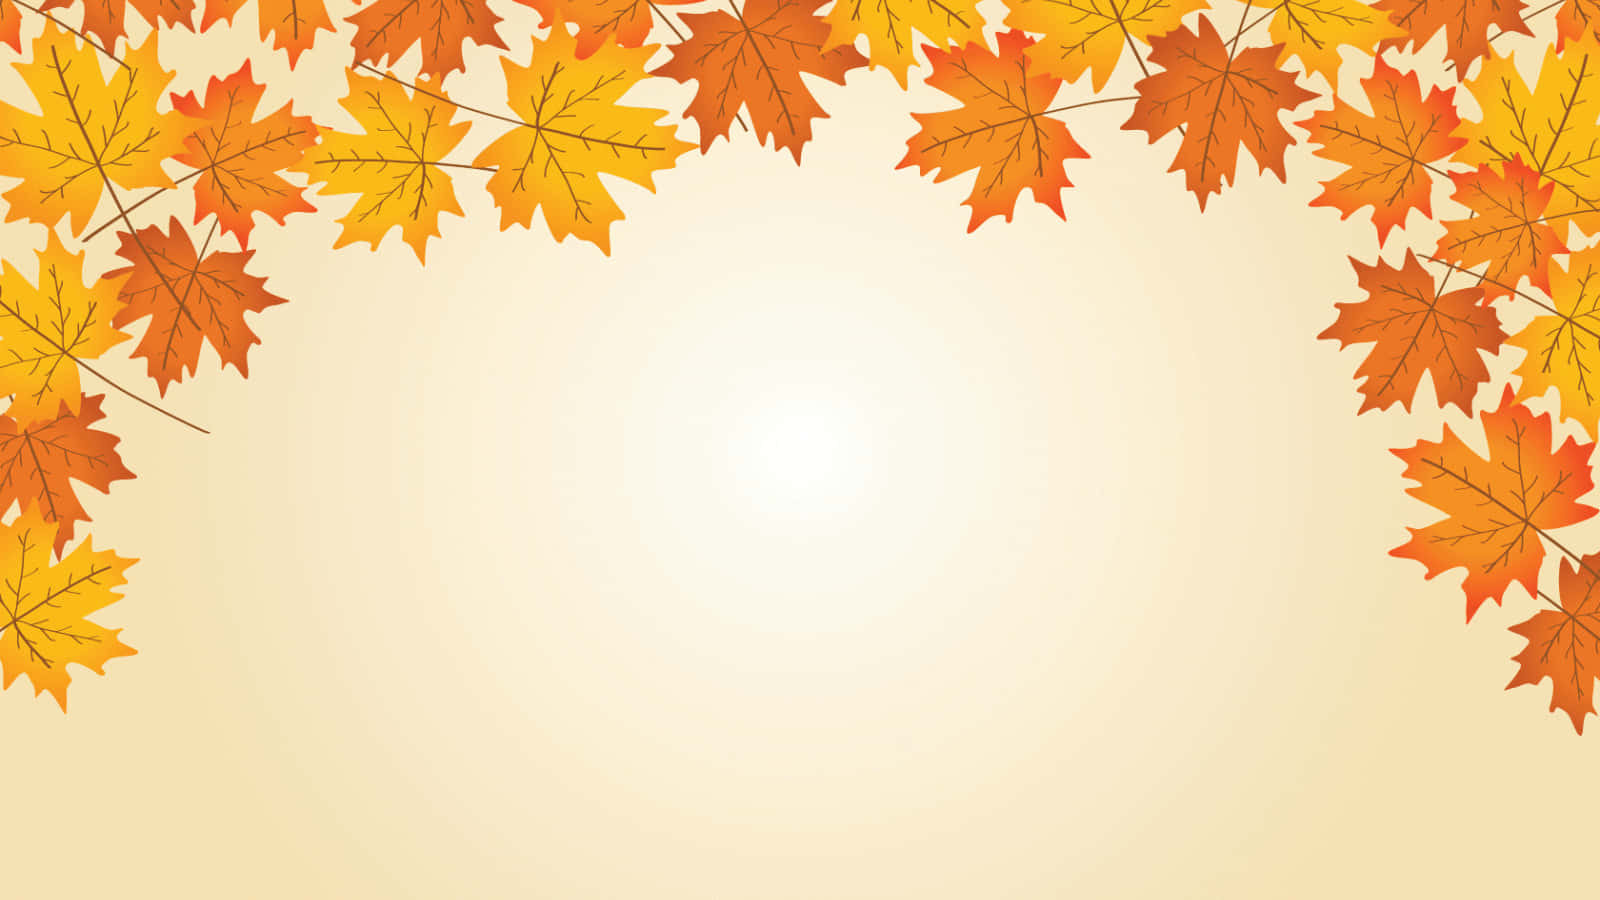 Celebrate the beauty of fall with this adorable illustration Wallpaper